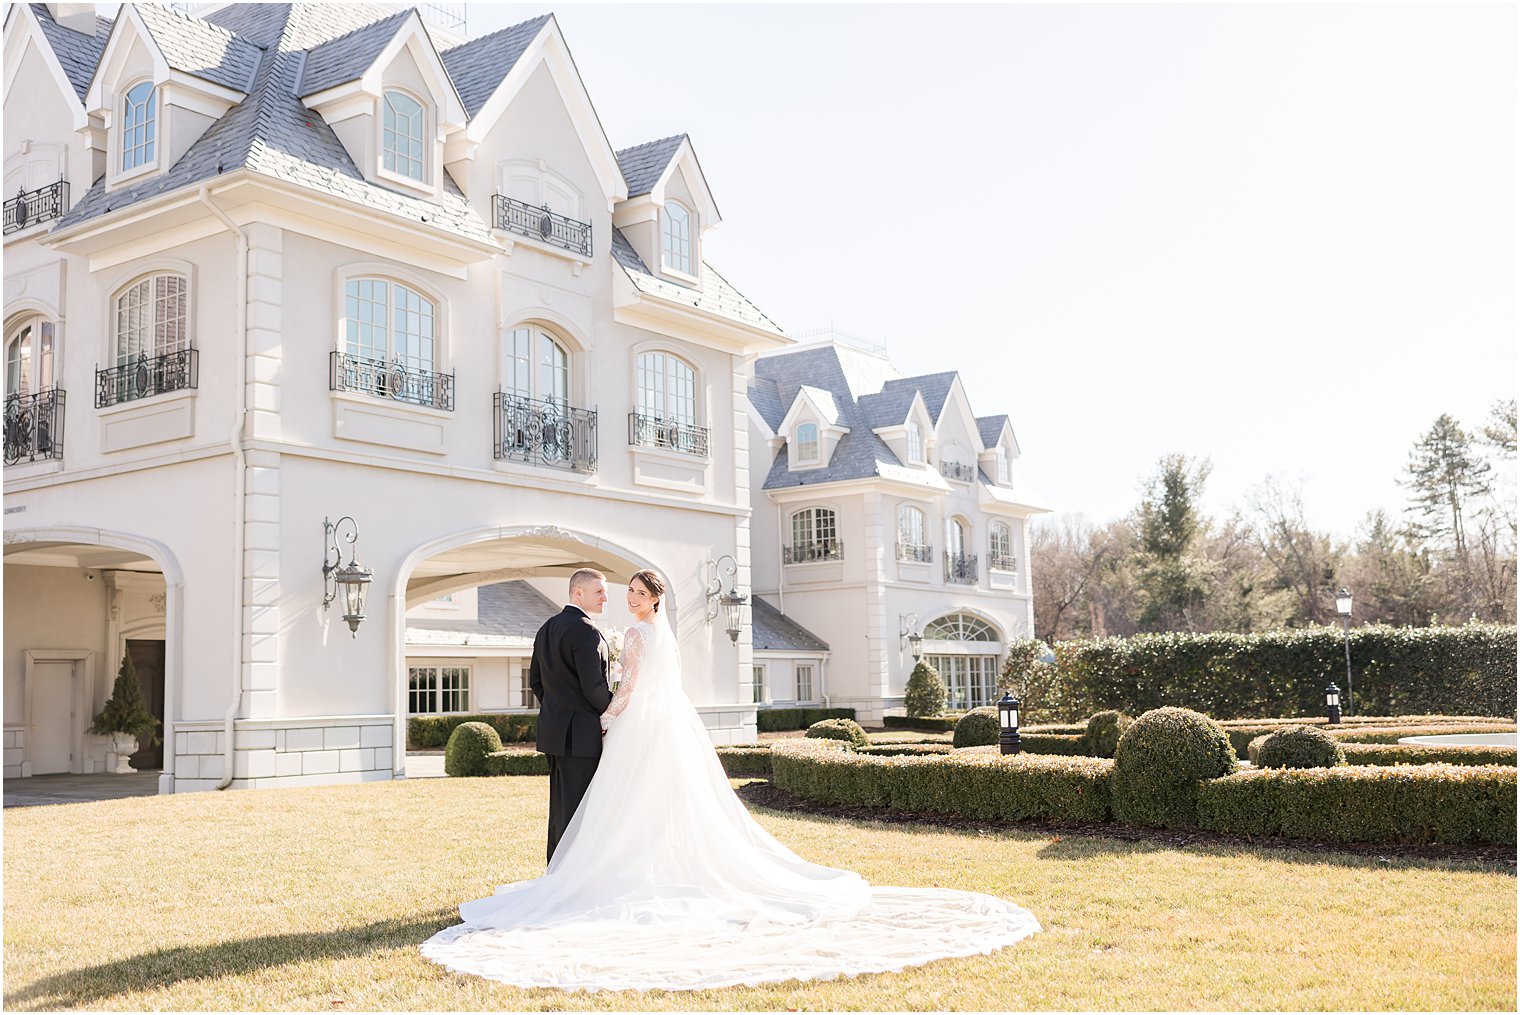 newlyweds stand on lawn in front of Park Chateau Estate with bride's train spread out